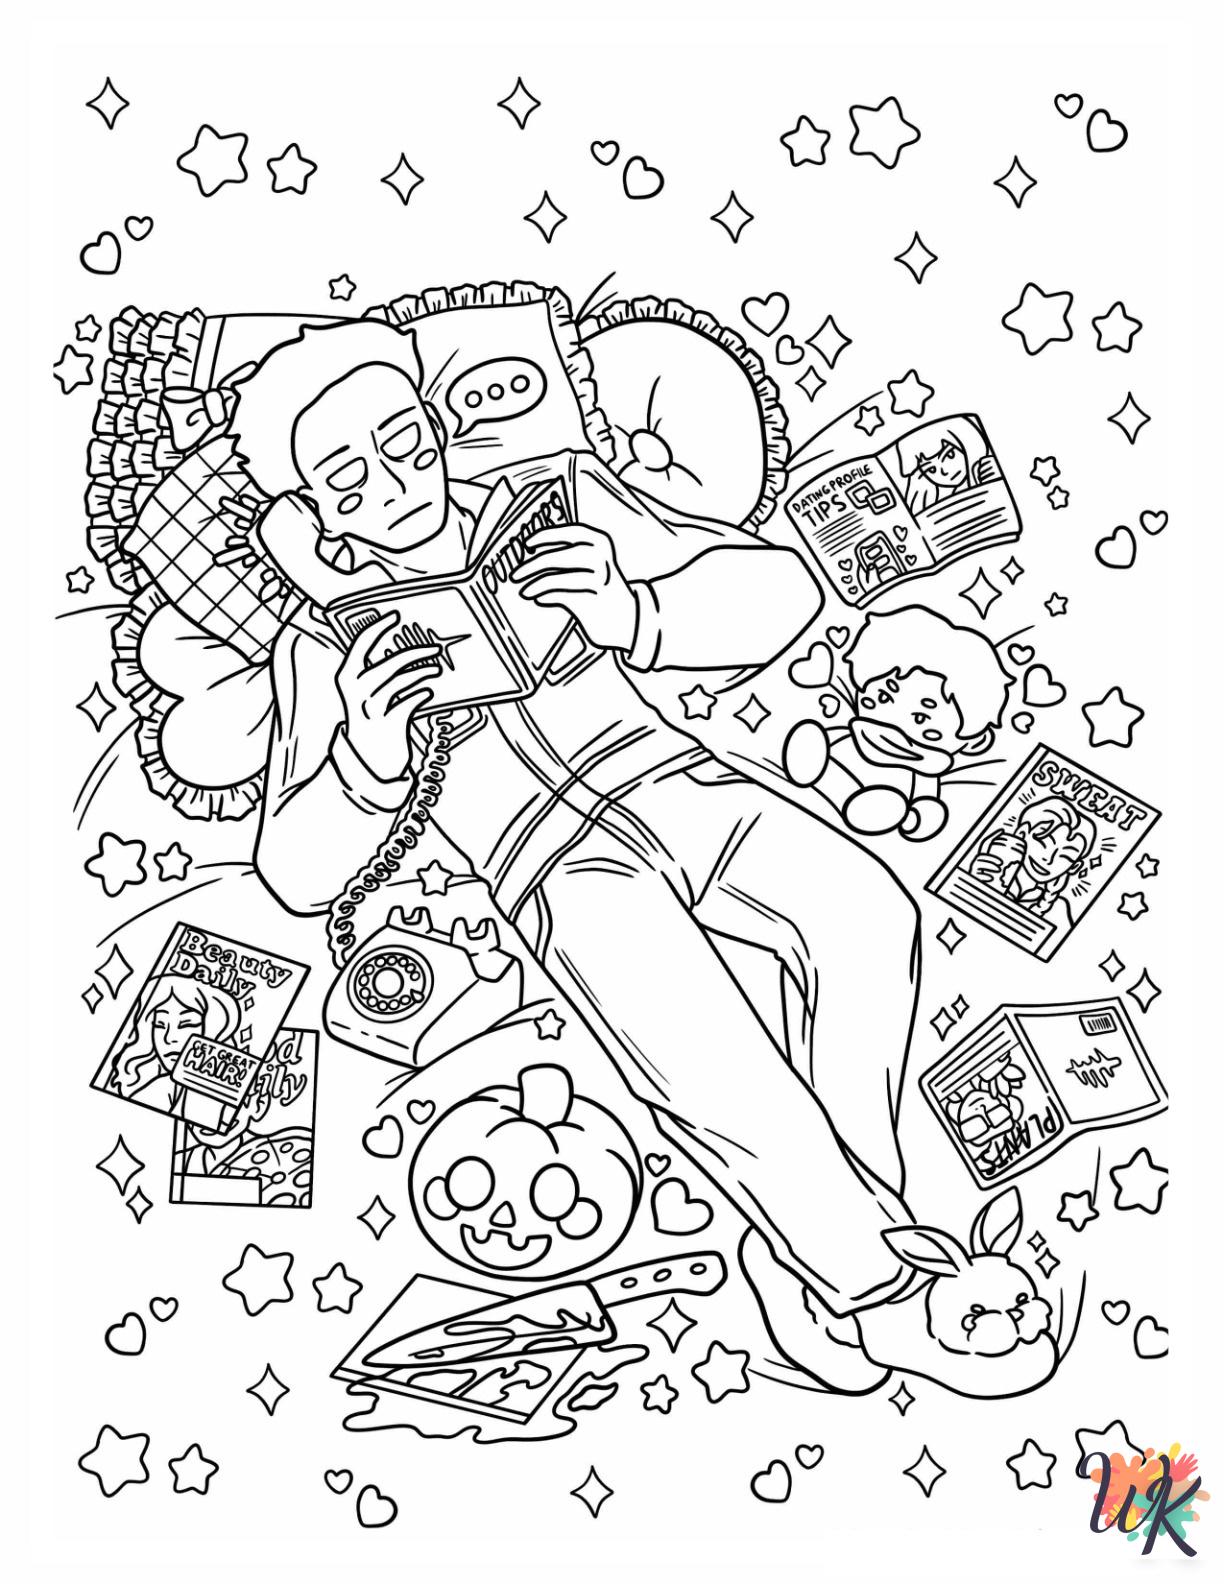 Aesthetic coloring pages for kids